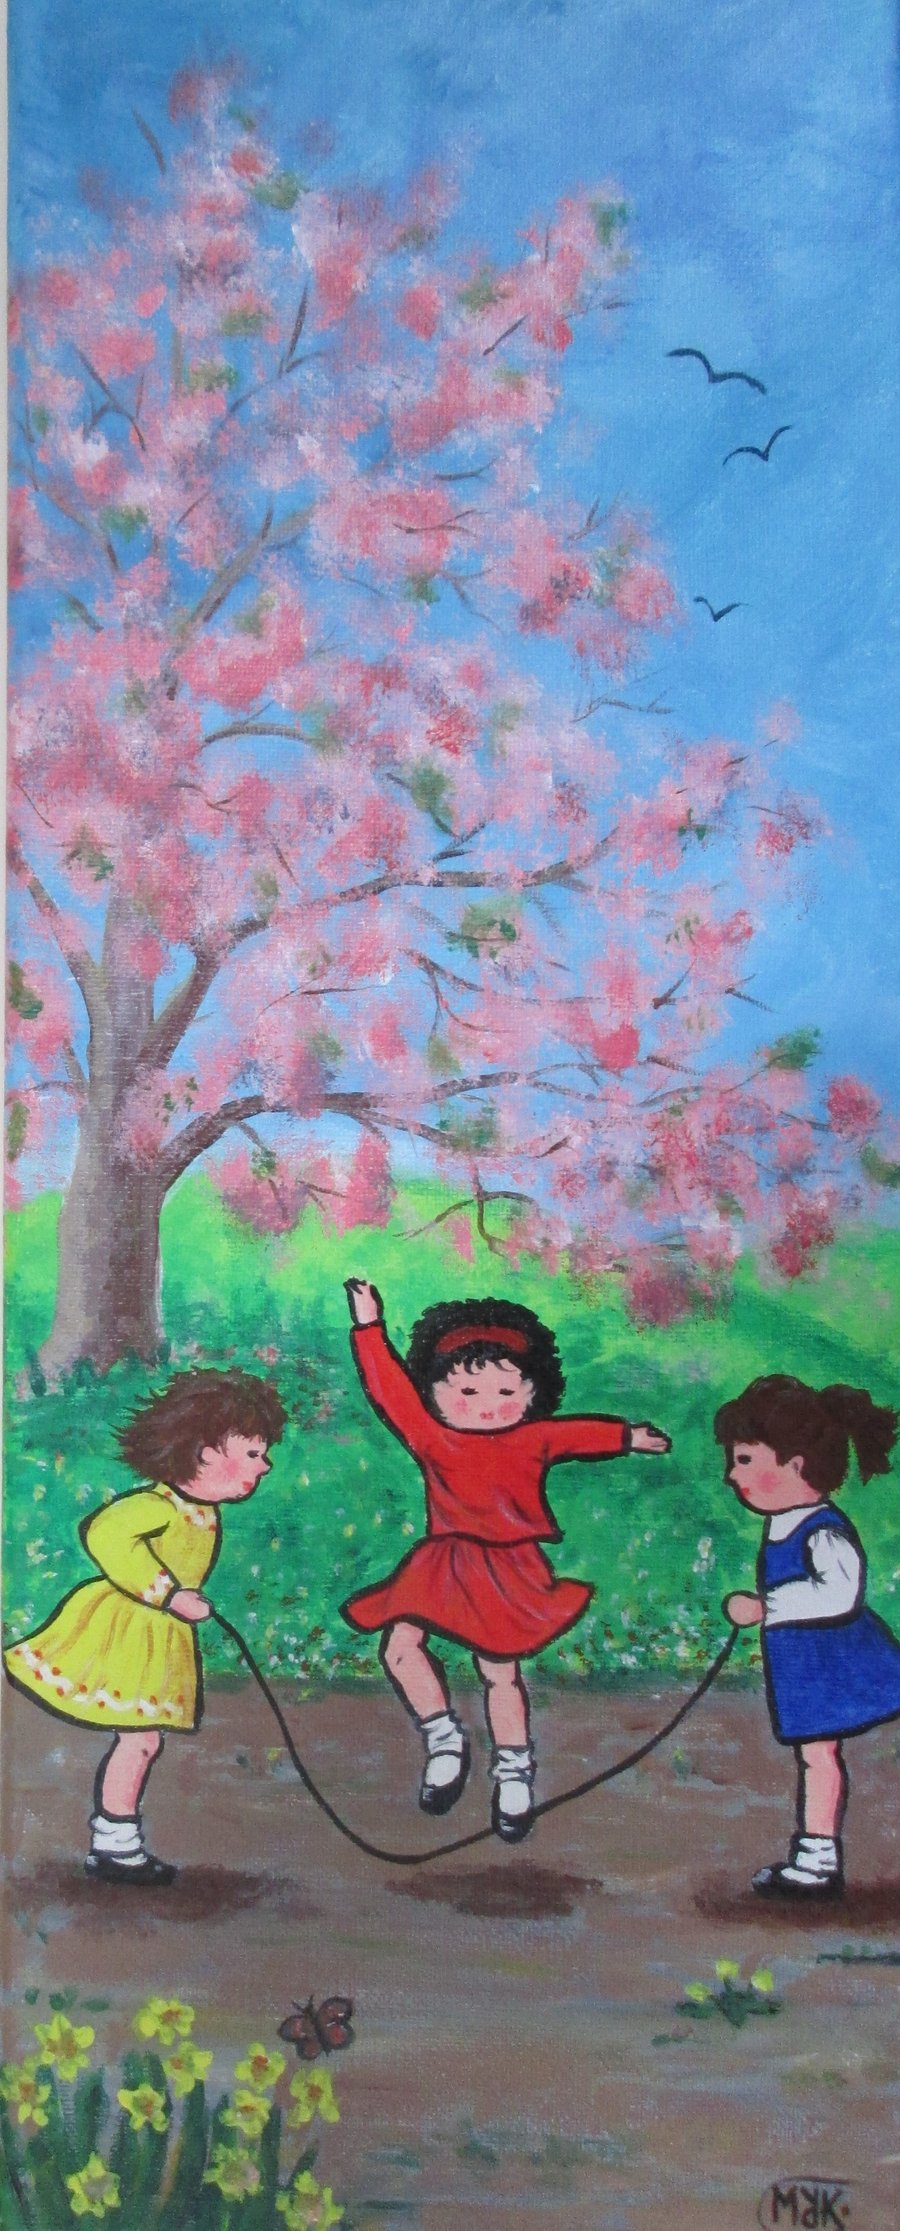 Little Girls Playing In The Spring. Original art on canvas